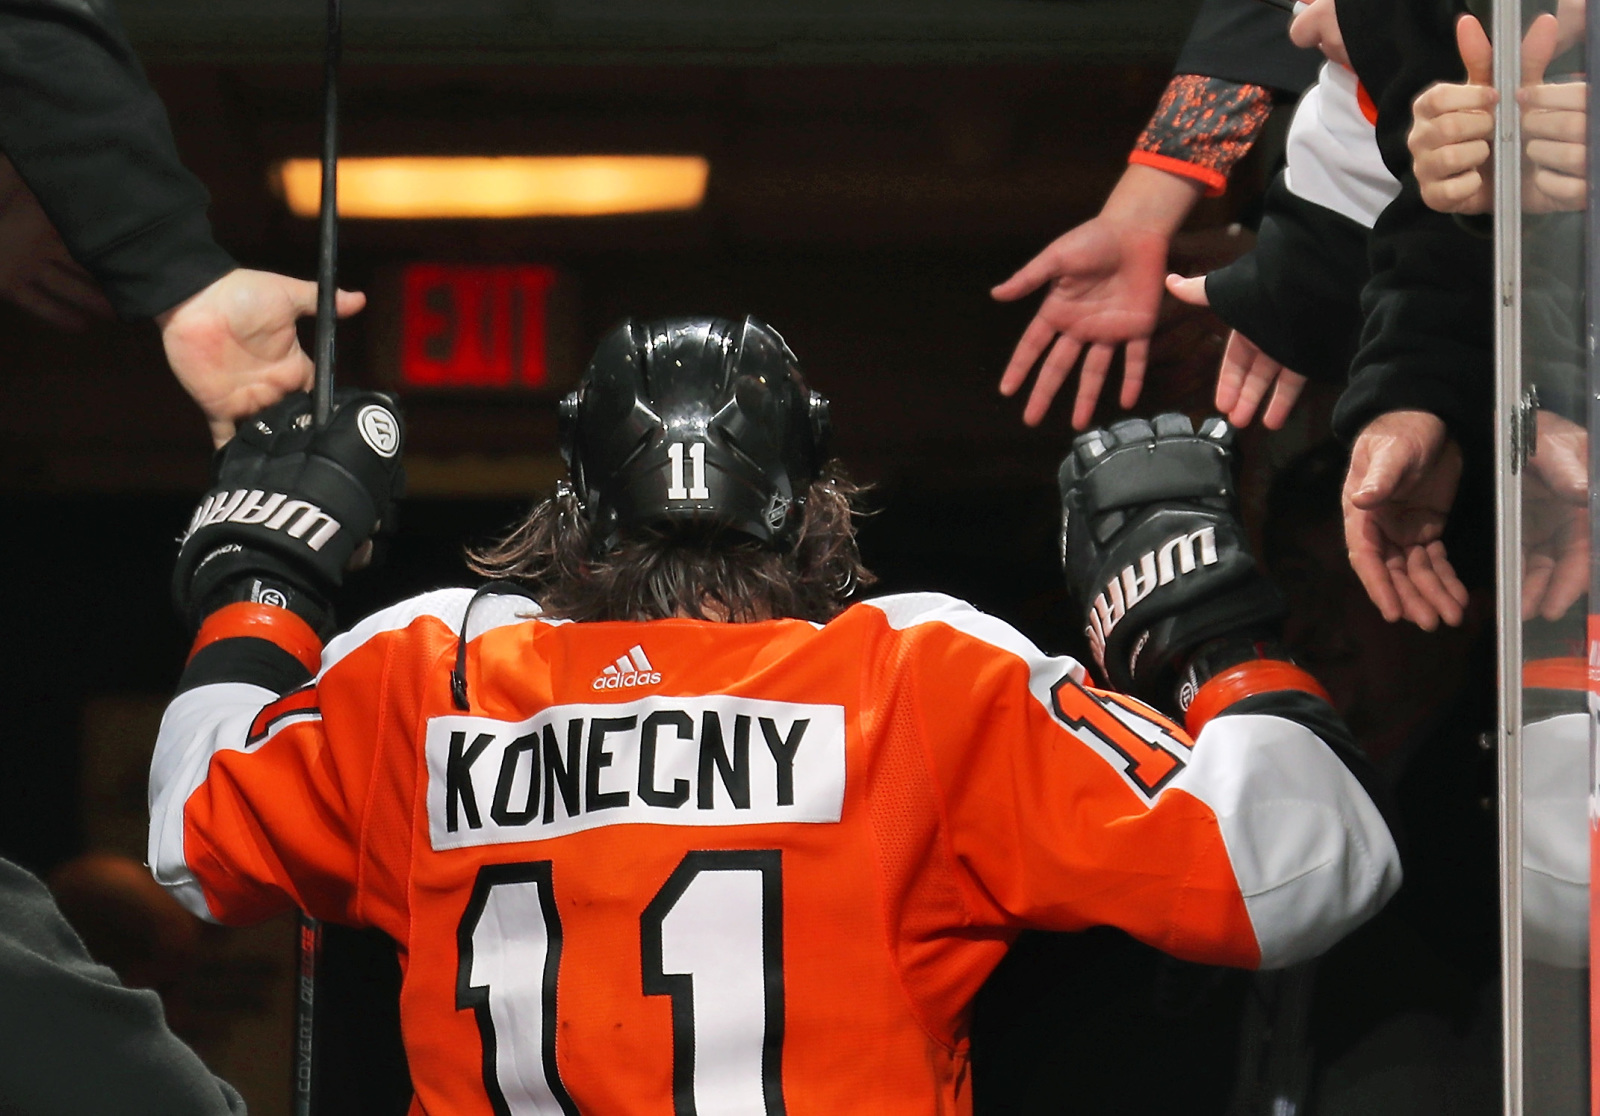 Travis Konecny A Player To Watch For Flyers vs Penguins